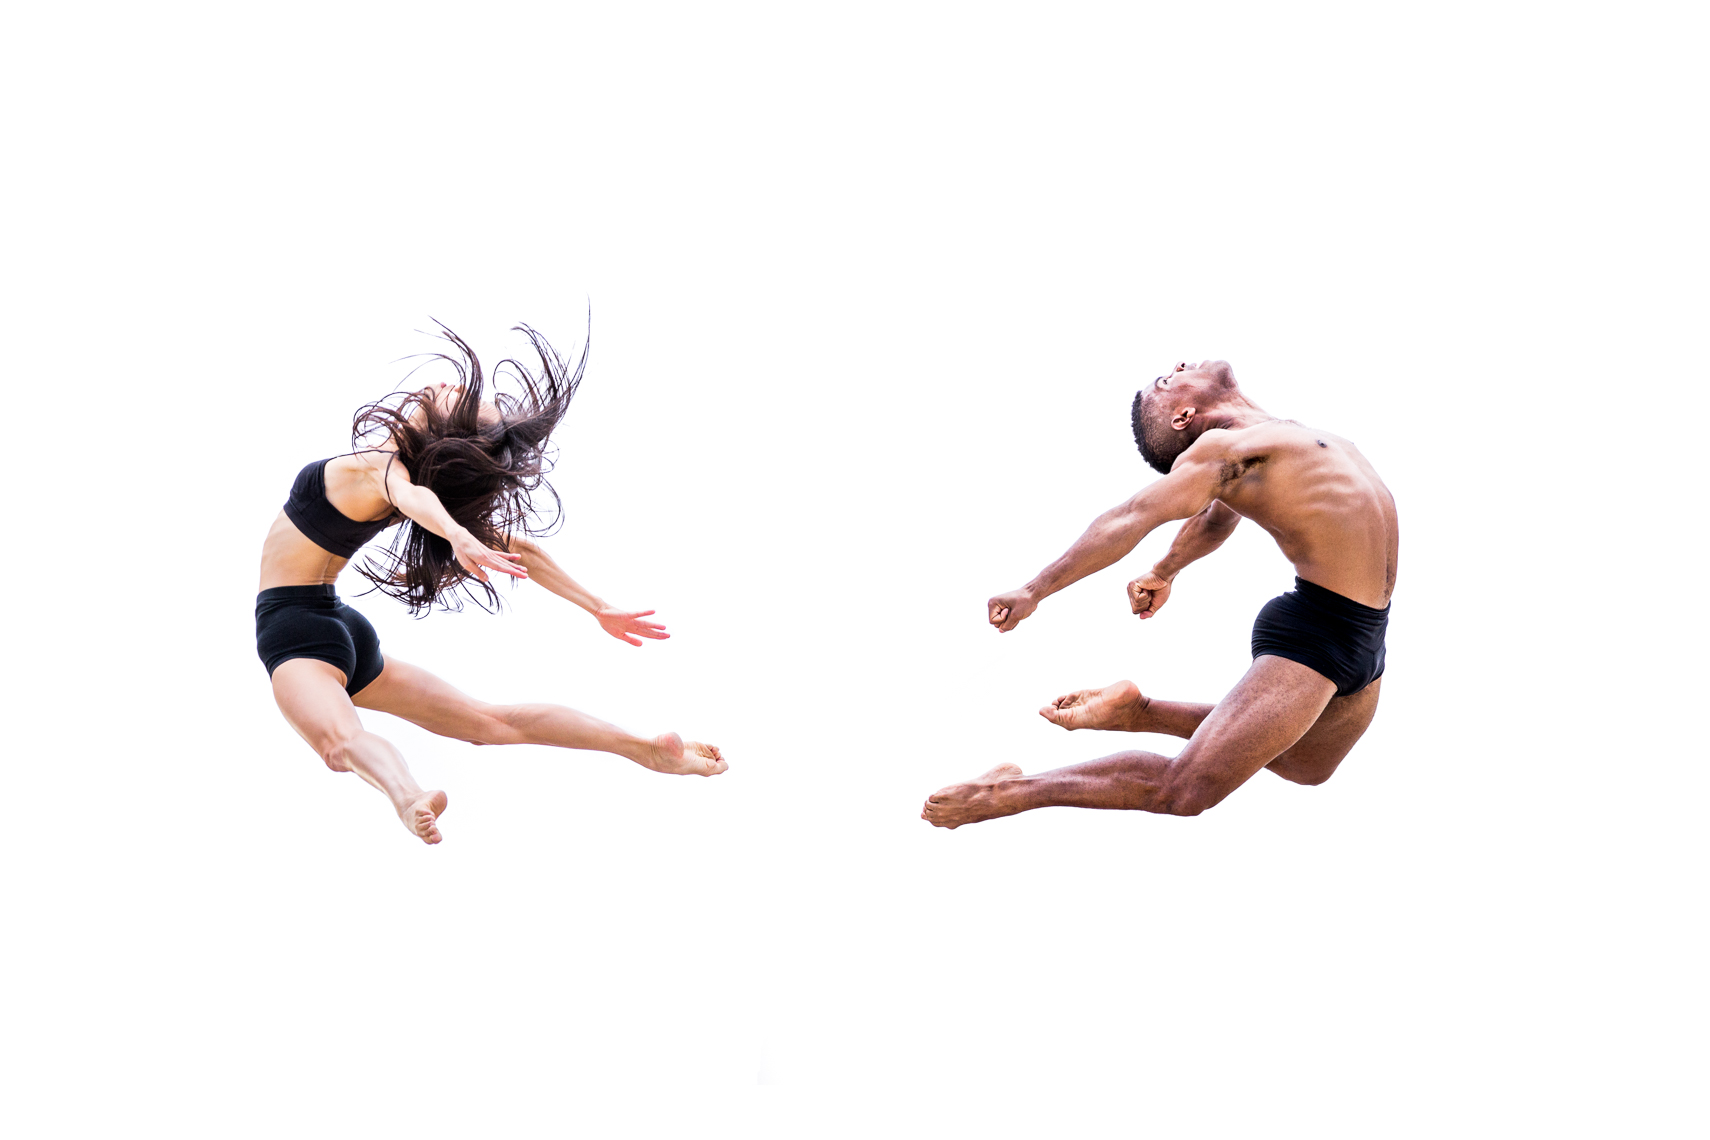 The direction: to Interpret the Tango dance while in the air. A study of movement by Robert Houser in the Bay Area.